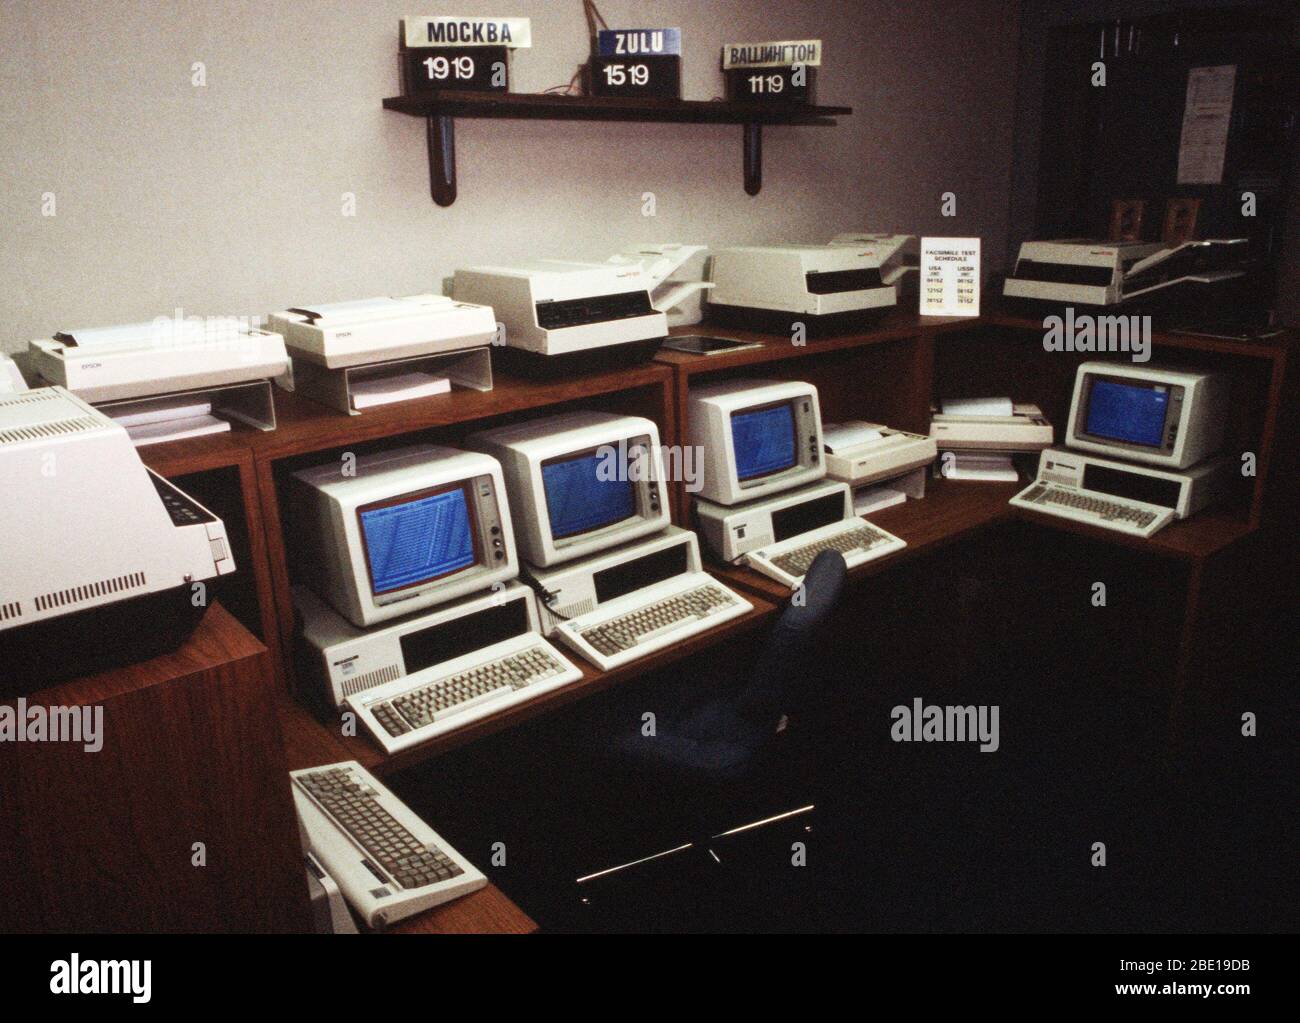 A view of computer stations, printers and facsimile machines that are part of American terminus of the Washington-Moscow Direct Communications Link.  Clocks on the wall give Moscow, Greenwich Mean (Zulu) and local times; a regular facsimile machine test schedule is at right. Stock Photo